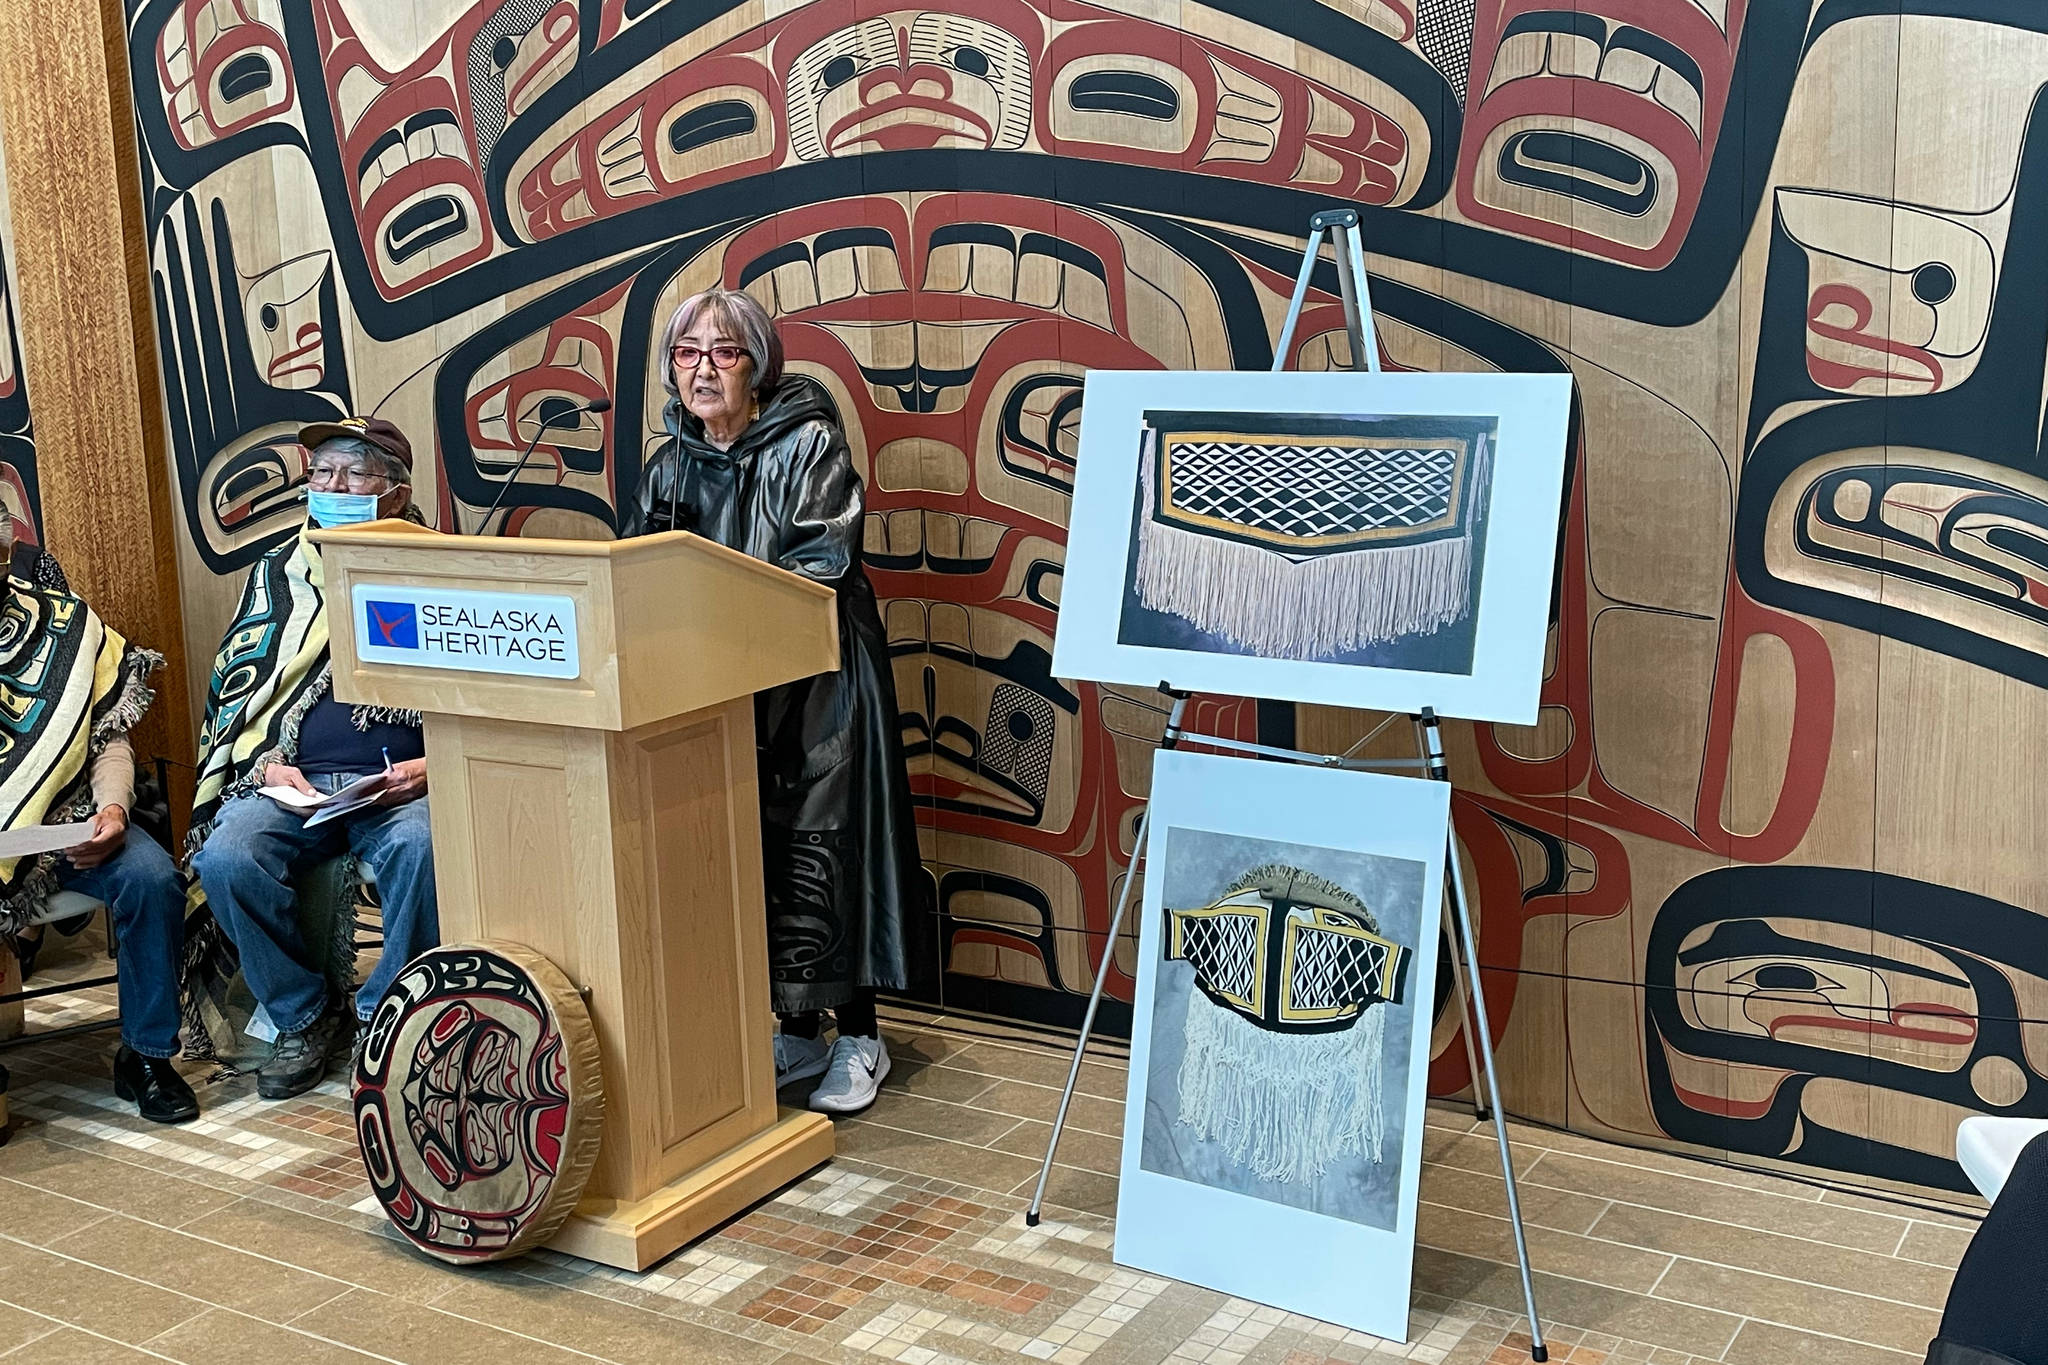 Michael S. Lockett / Juneau Empire 
Rosita Worl, president of the Sealaska Heritage Institute, speaks during a ceremony commemorating the settlement on an intellectual property lawsuit against a fashion company on Friday, Aug. 13, 2021.